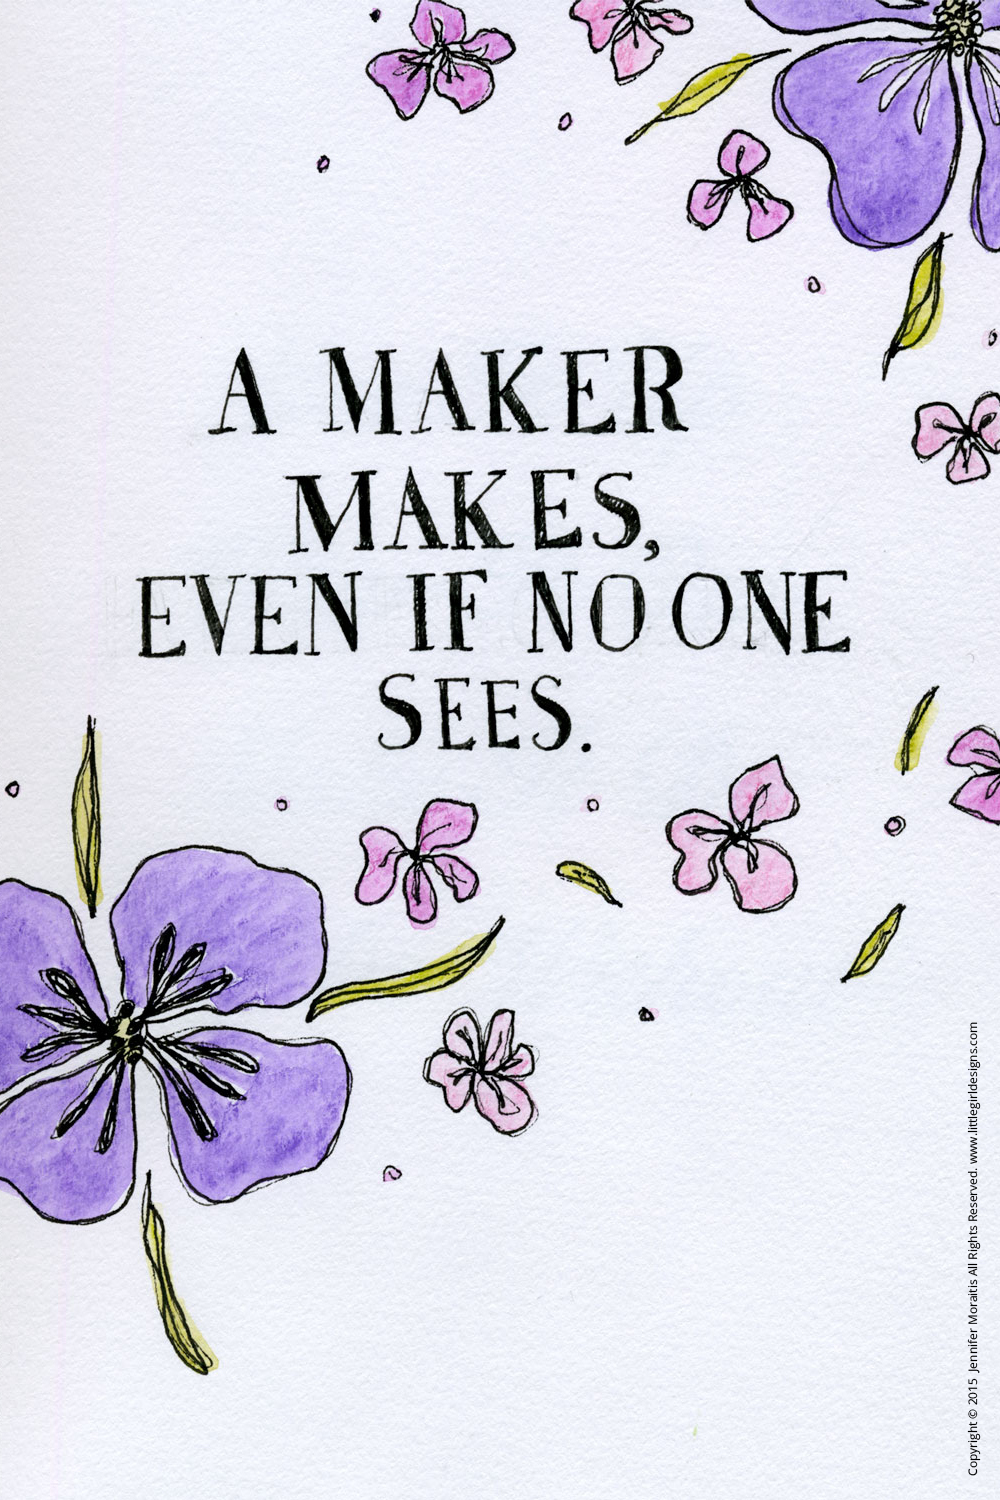 A Maker Makes, Even When No One Sees - do you have to have an incredibly successful creative business in order to feel valued? In order to do what you love? I don't think so...@littlegirldesigns.com